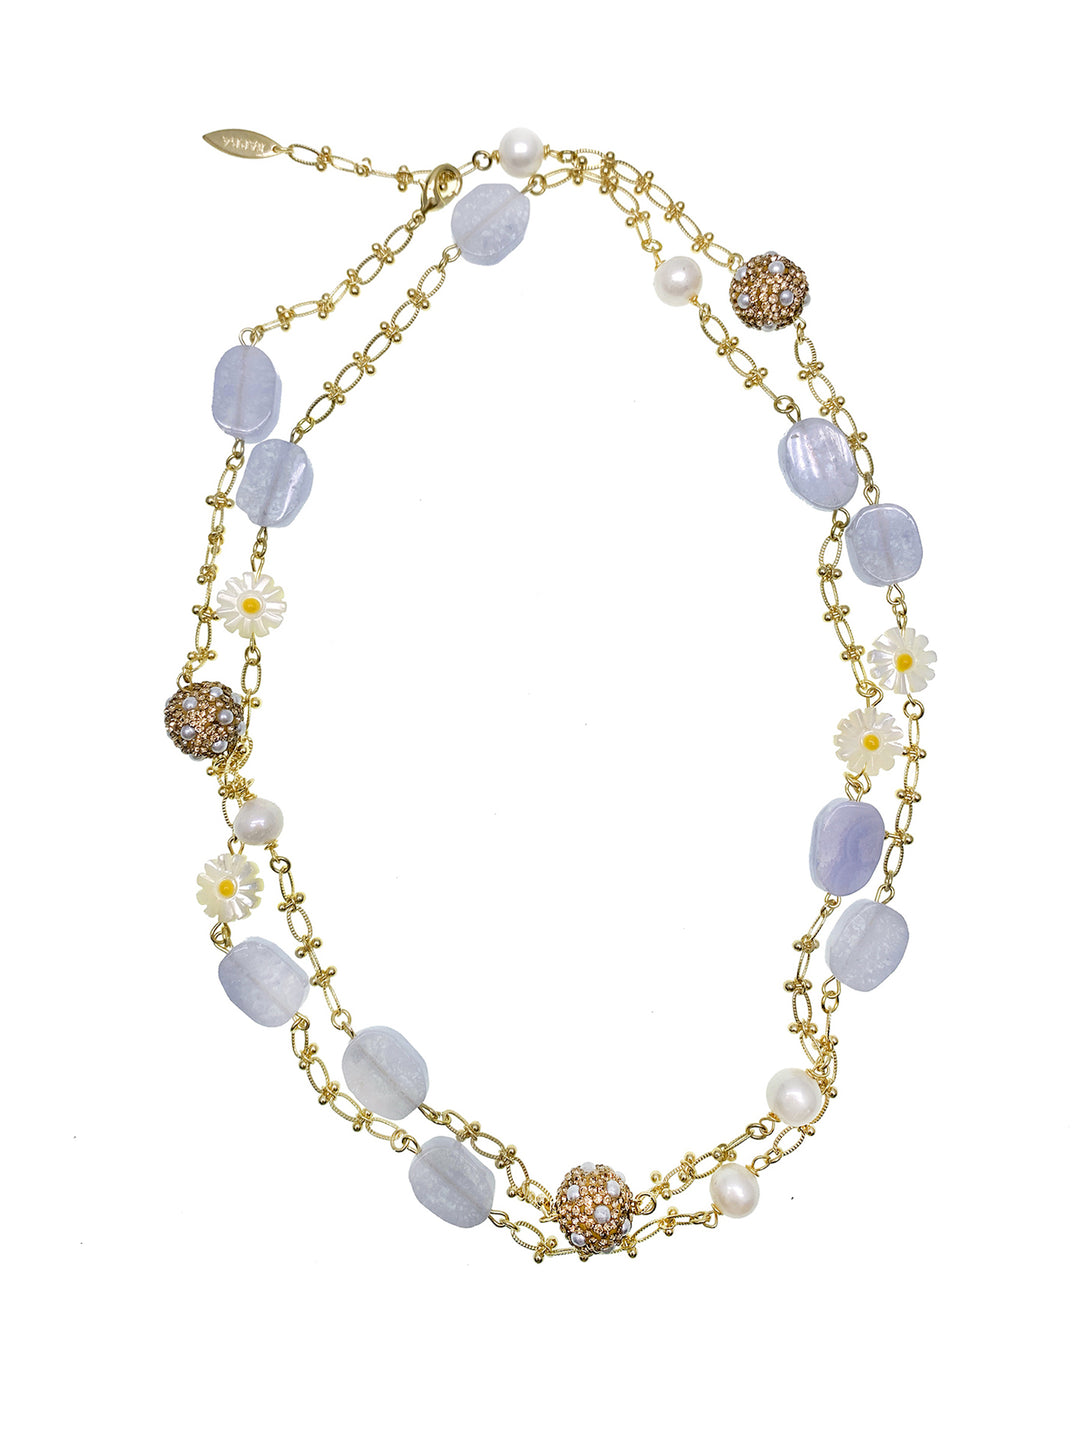 Blue Lace Agate With Daisy Flower Charm & Rhinestones Multi-Way Chain Necklace GN022 - FARRA